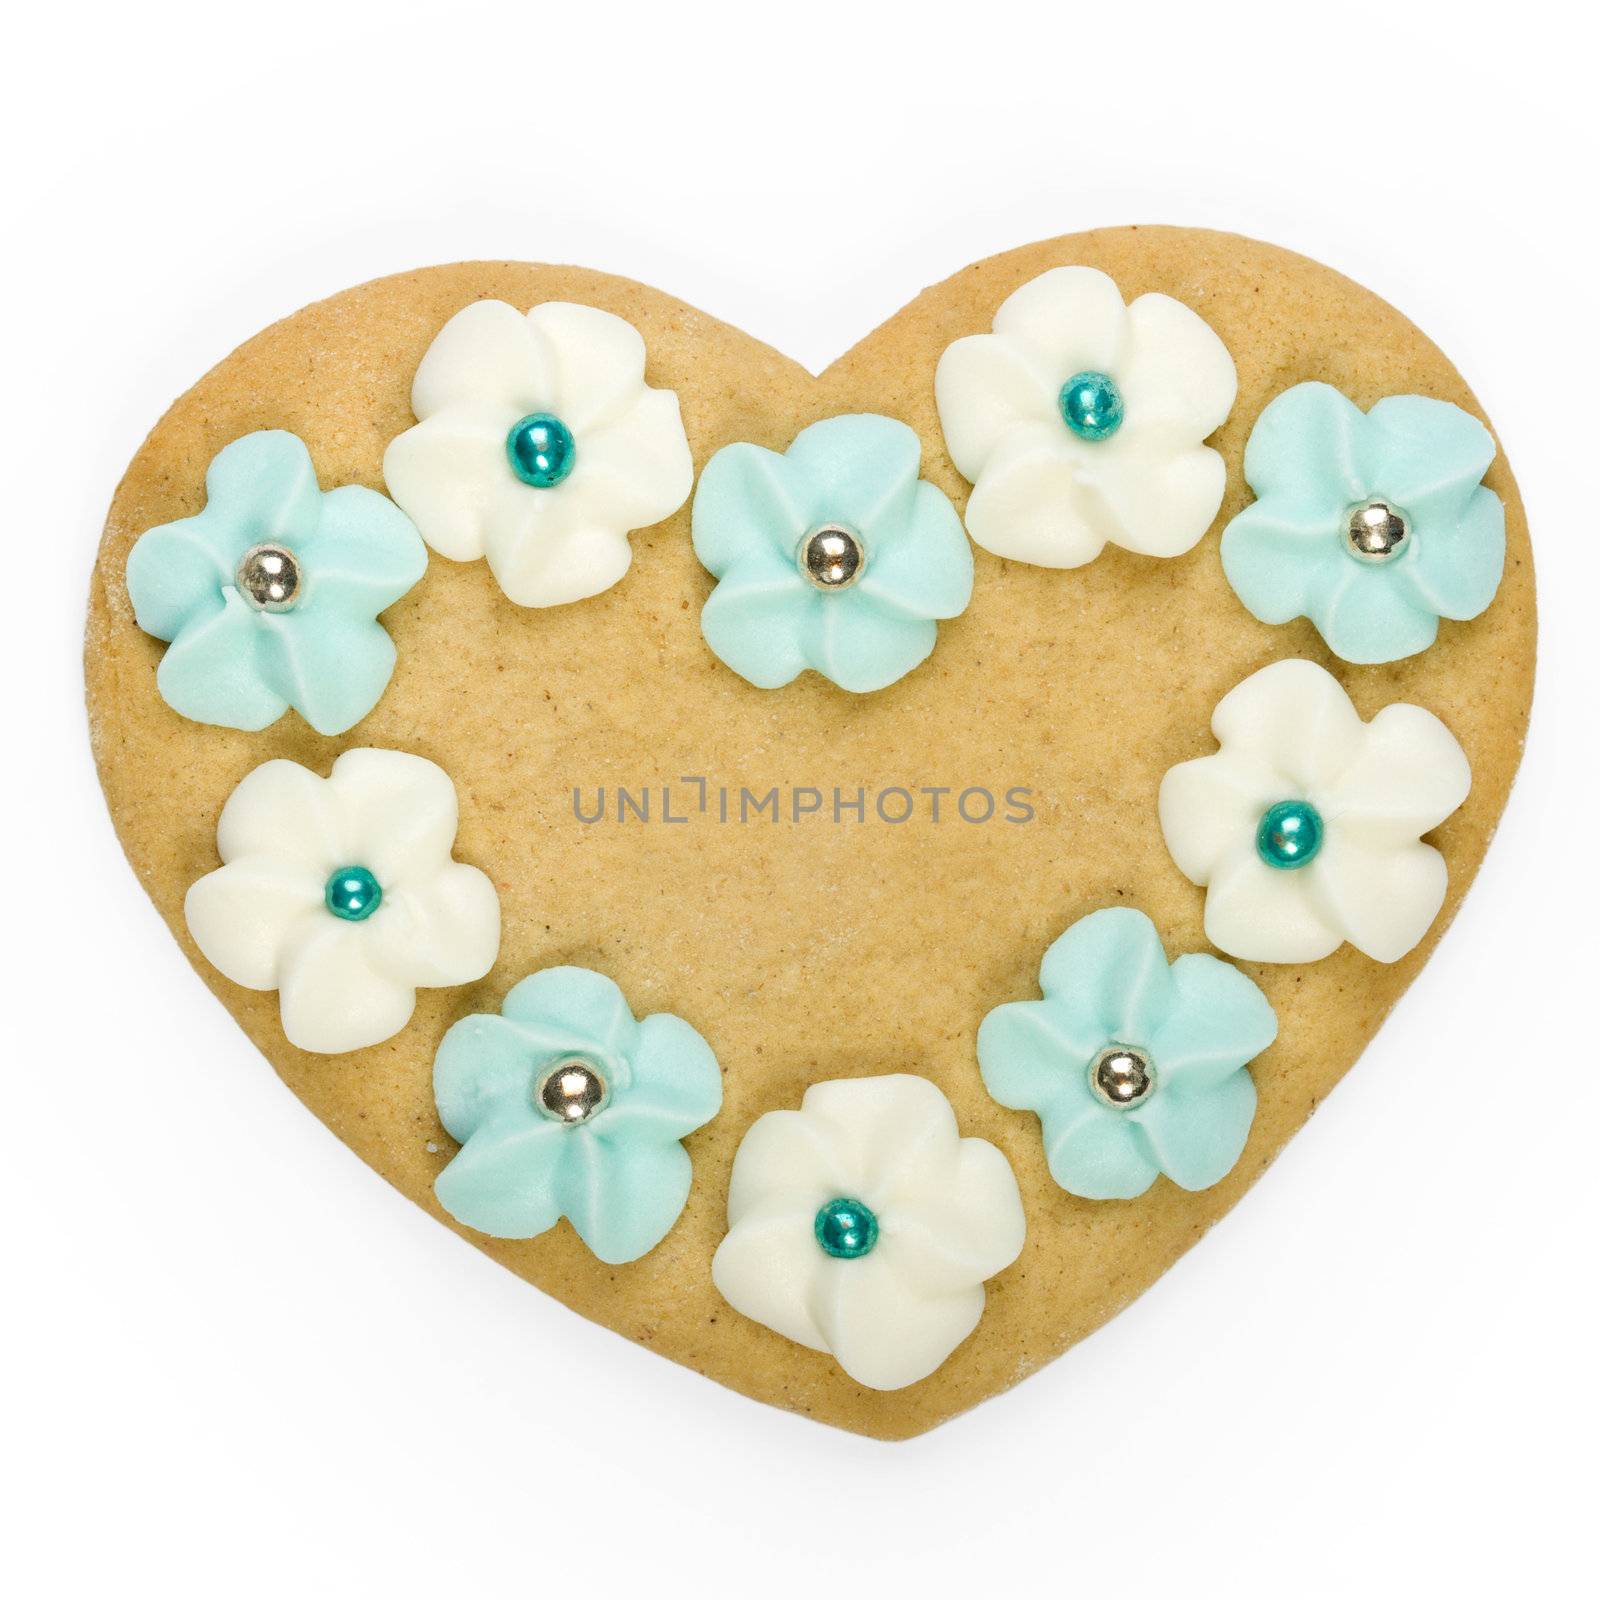 Heart shaped cookie by RuthBlack